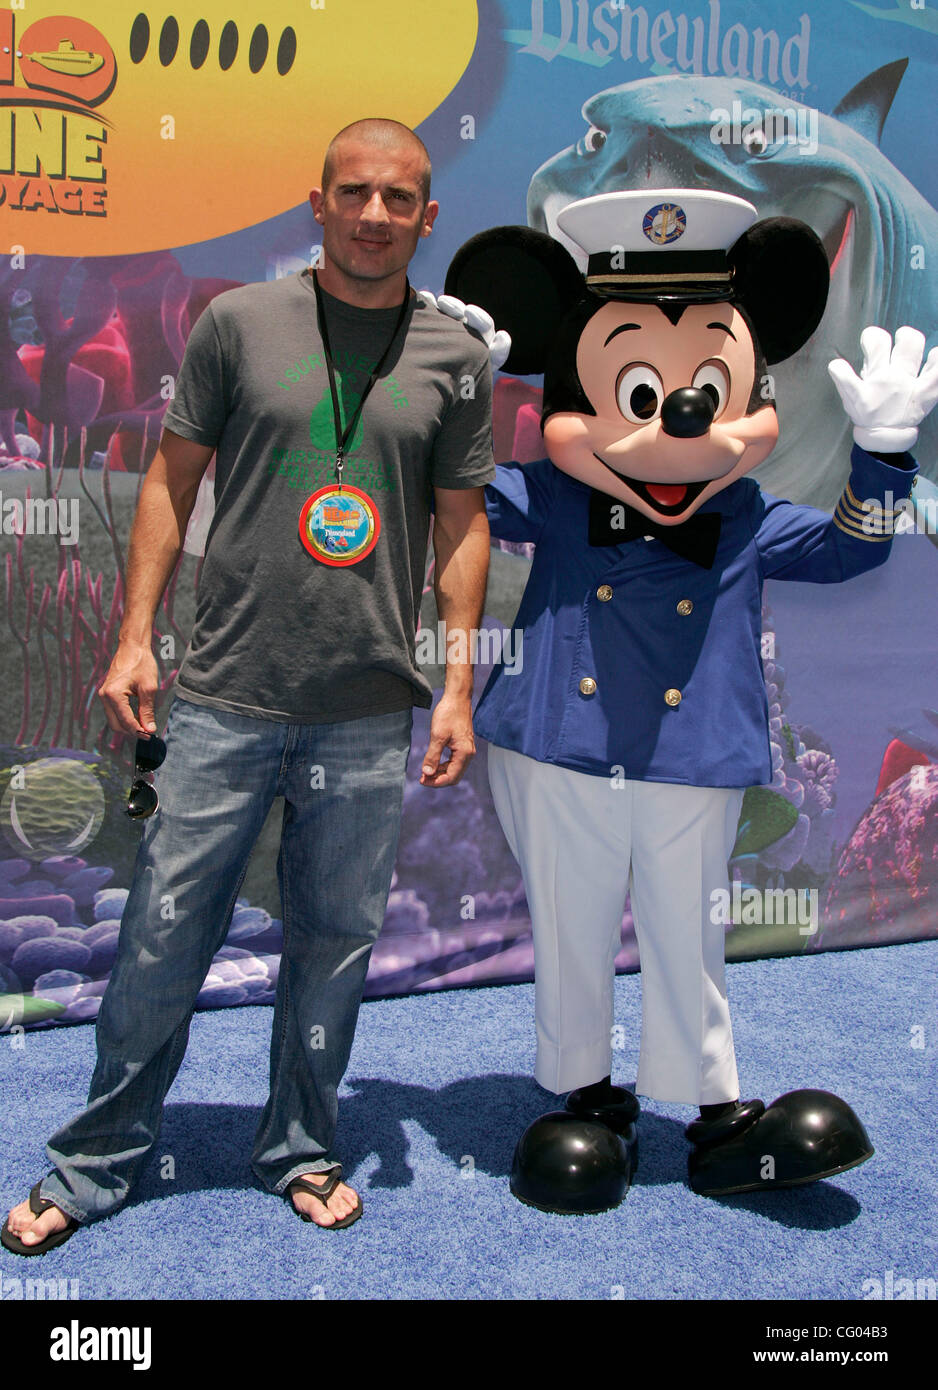 Jun 10, 2007 - Anaheim, California, USA - Actor DOMINIC PURCELL & MICKEY MOUSE at the Finding Nemo Submarine Voyage opening at Disneyland Park.  (Credit Image: © Lisa O'Connor/ZUMA Press) Stock Photo